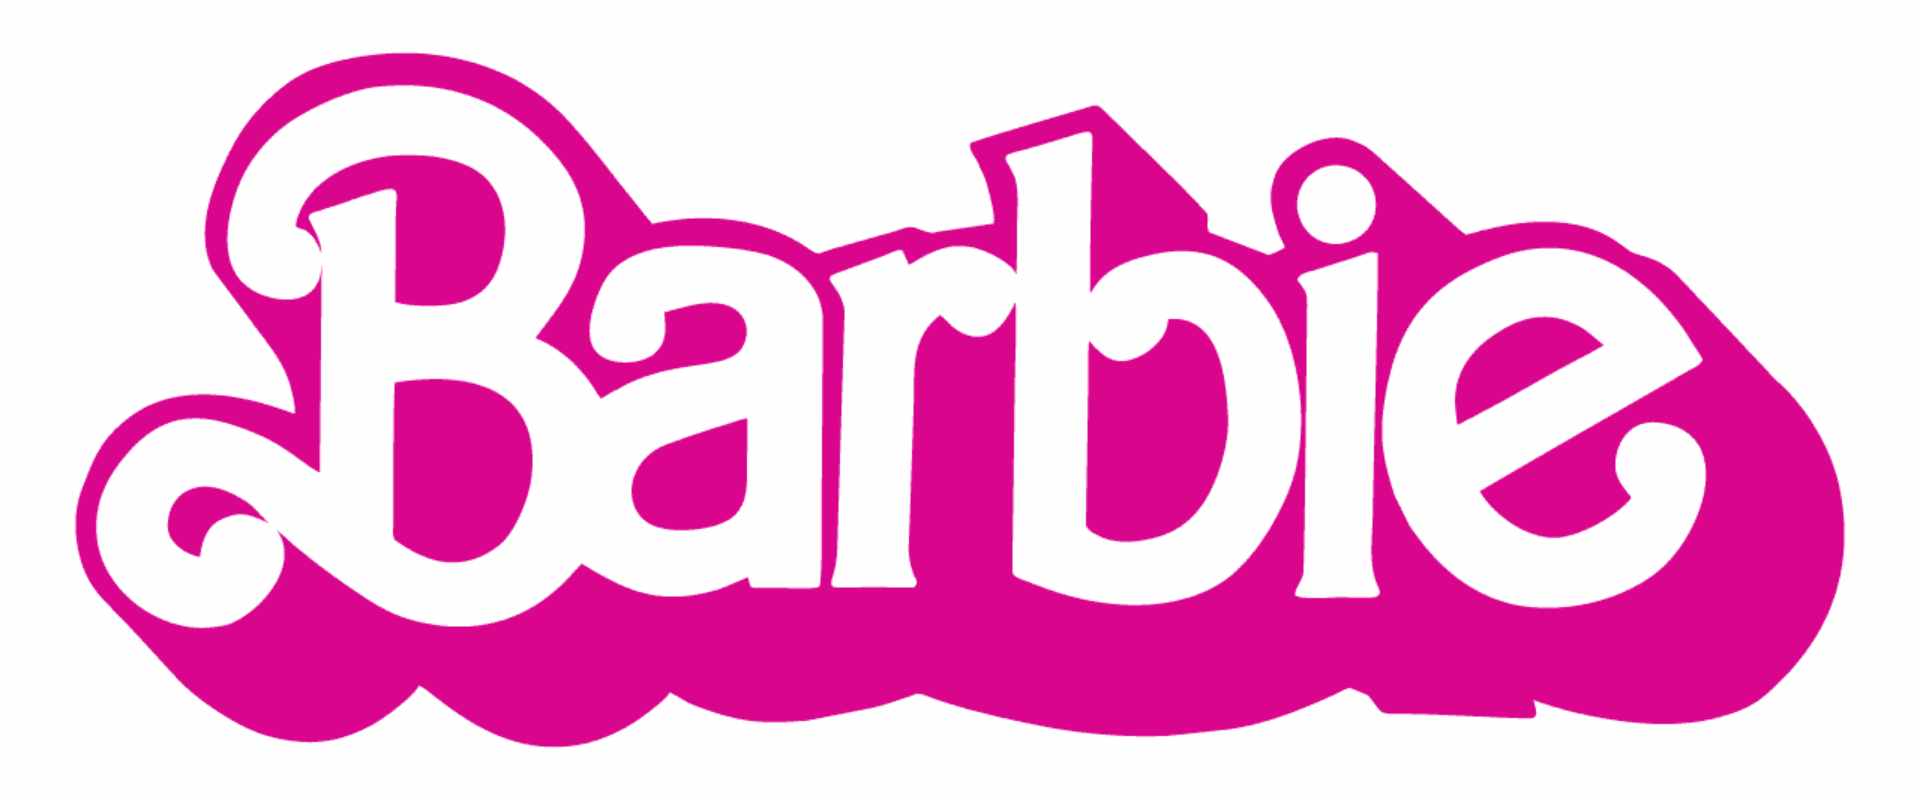 A Parent's Guide to the New Barbie Film: Themes, Lessons, and Talking Points